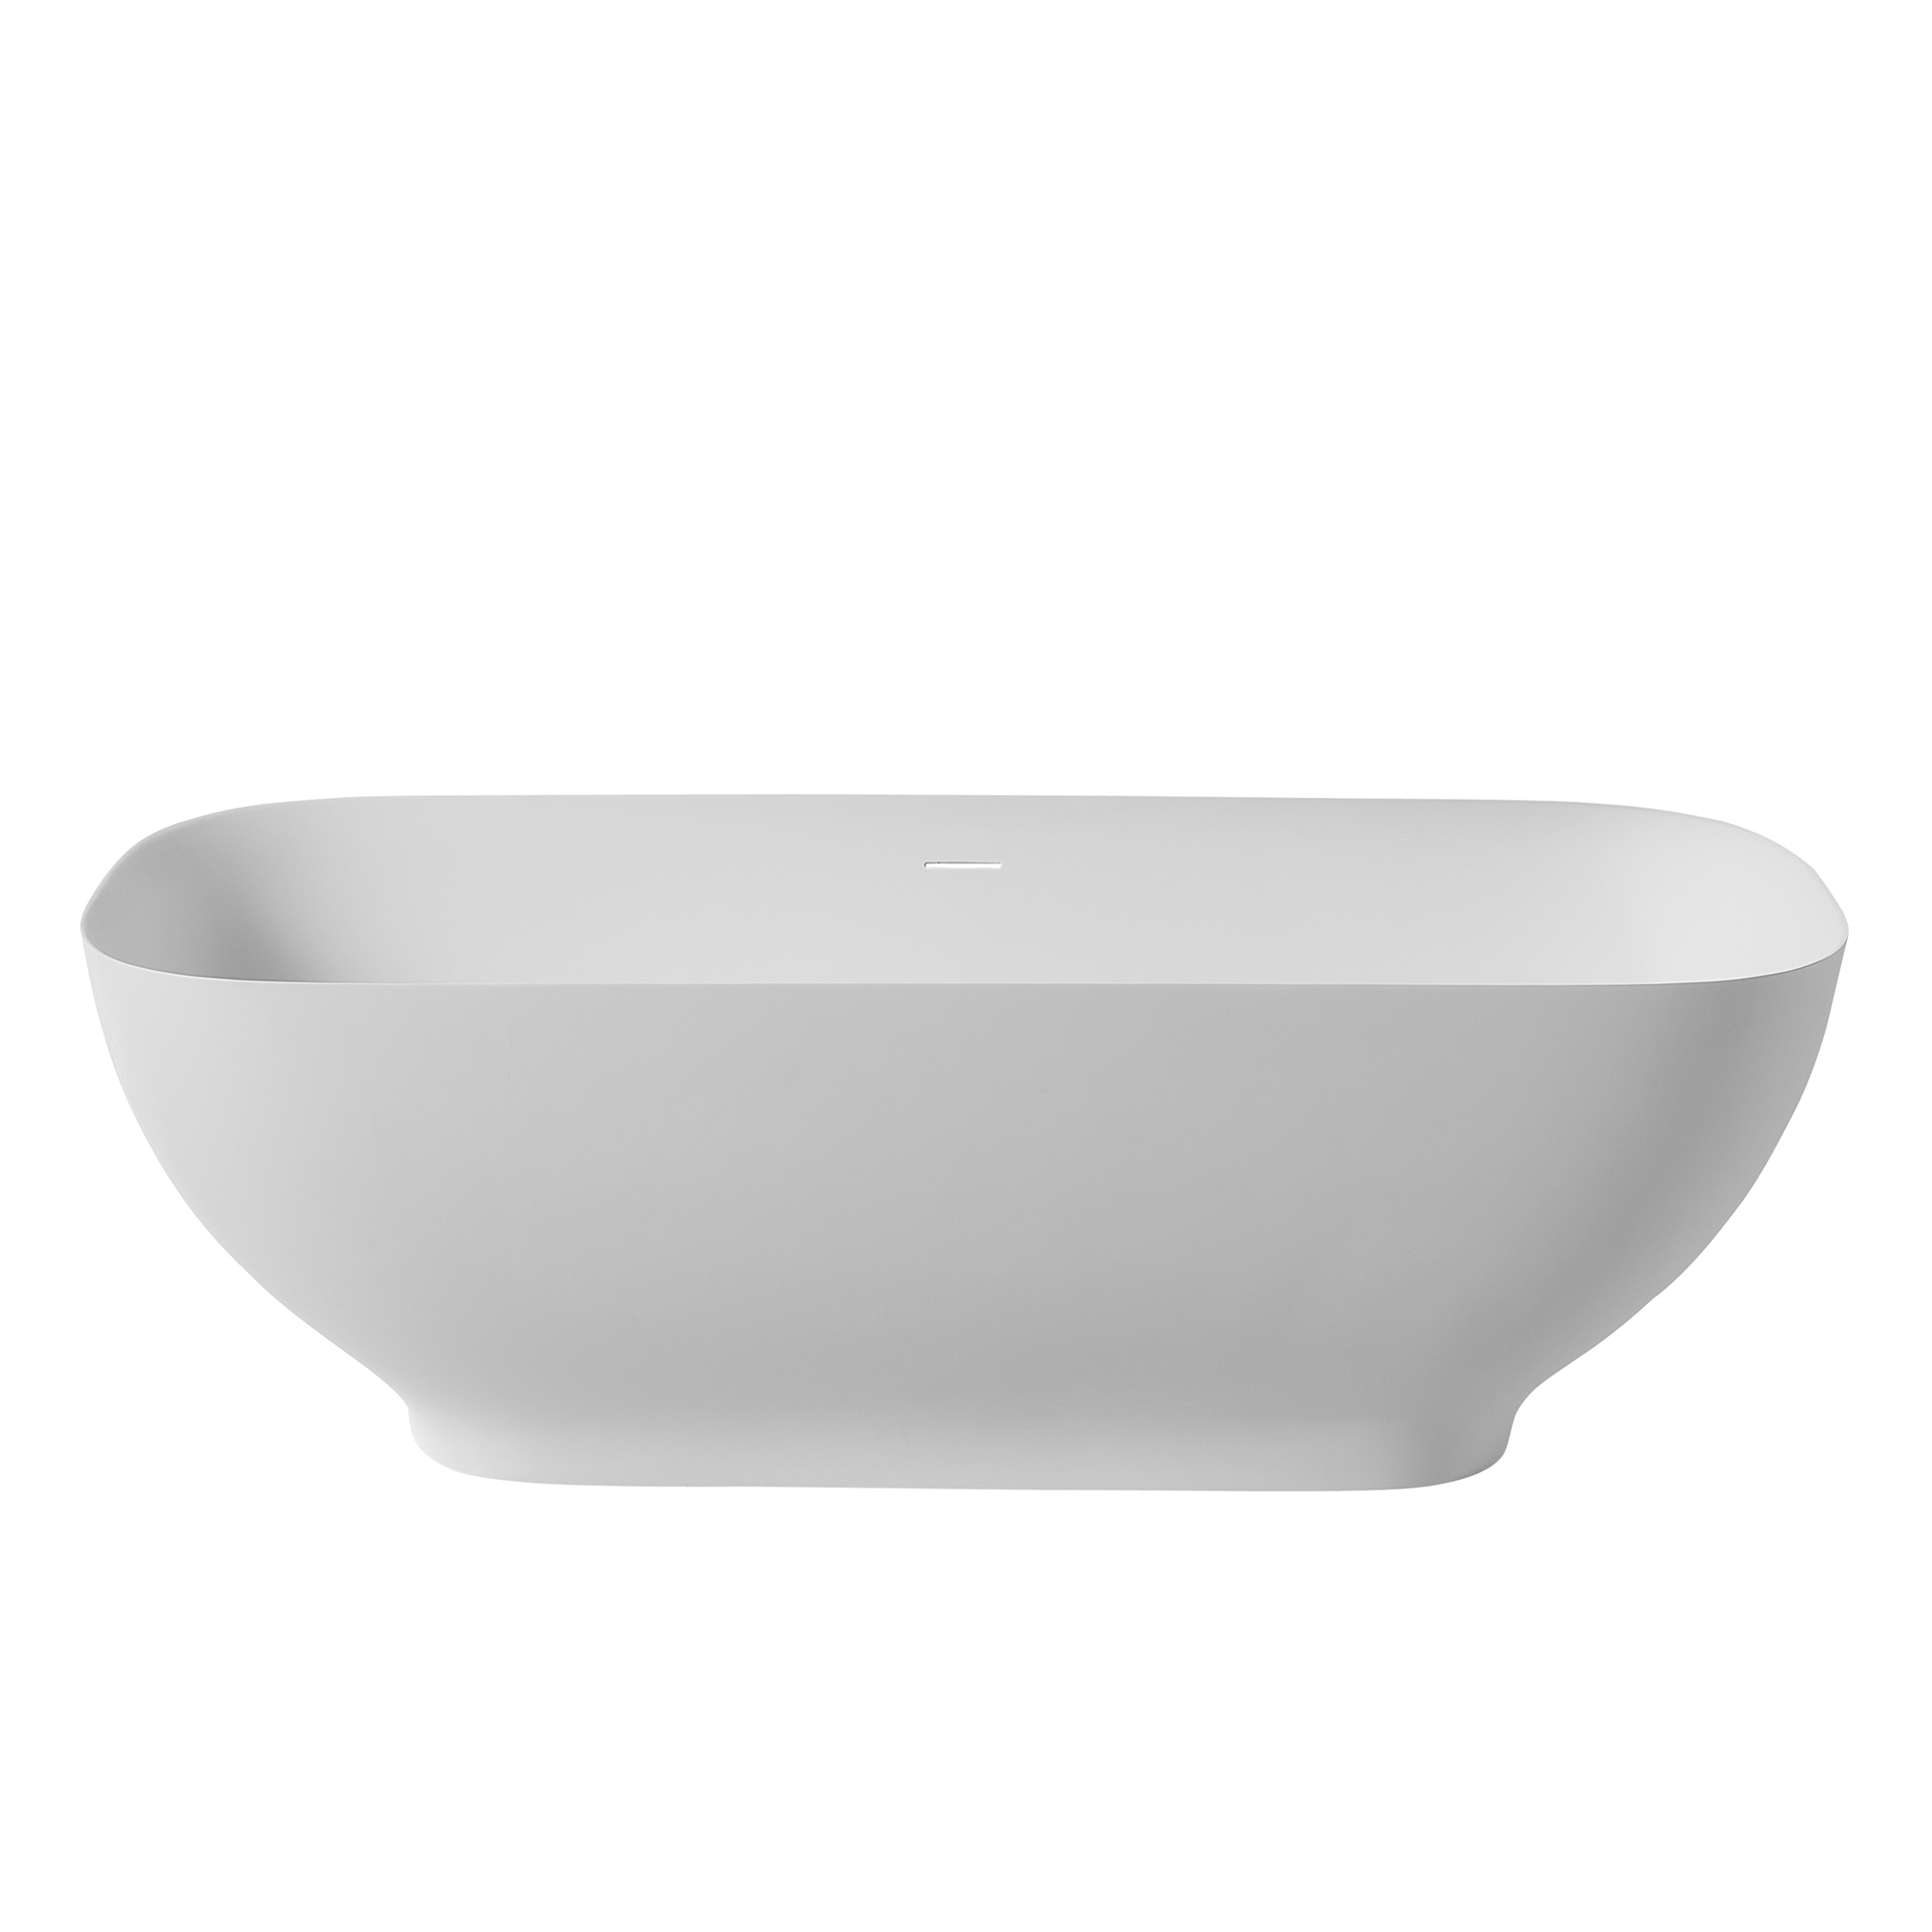 Elevate Your Dreams with Our 63"/67" Freestanding Tub, Rectangular Shapes Stone Resin Bathtubs with Overflow and Center Drain, Matte White Color: Simple, Elegant, and Available in Various Sizes